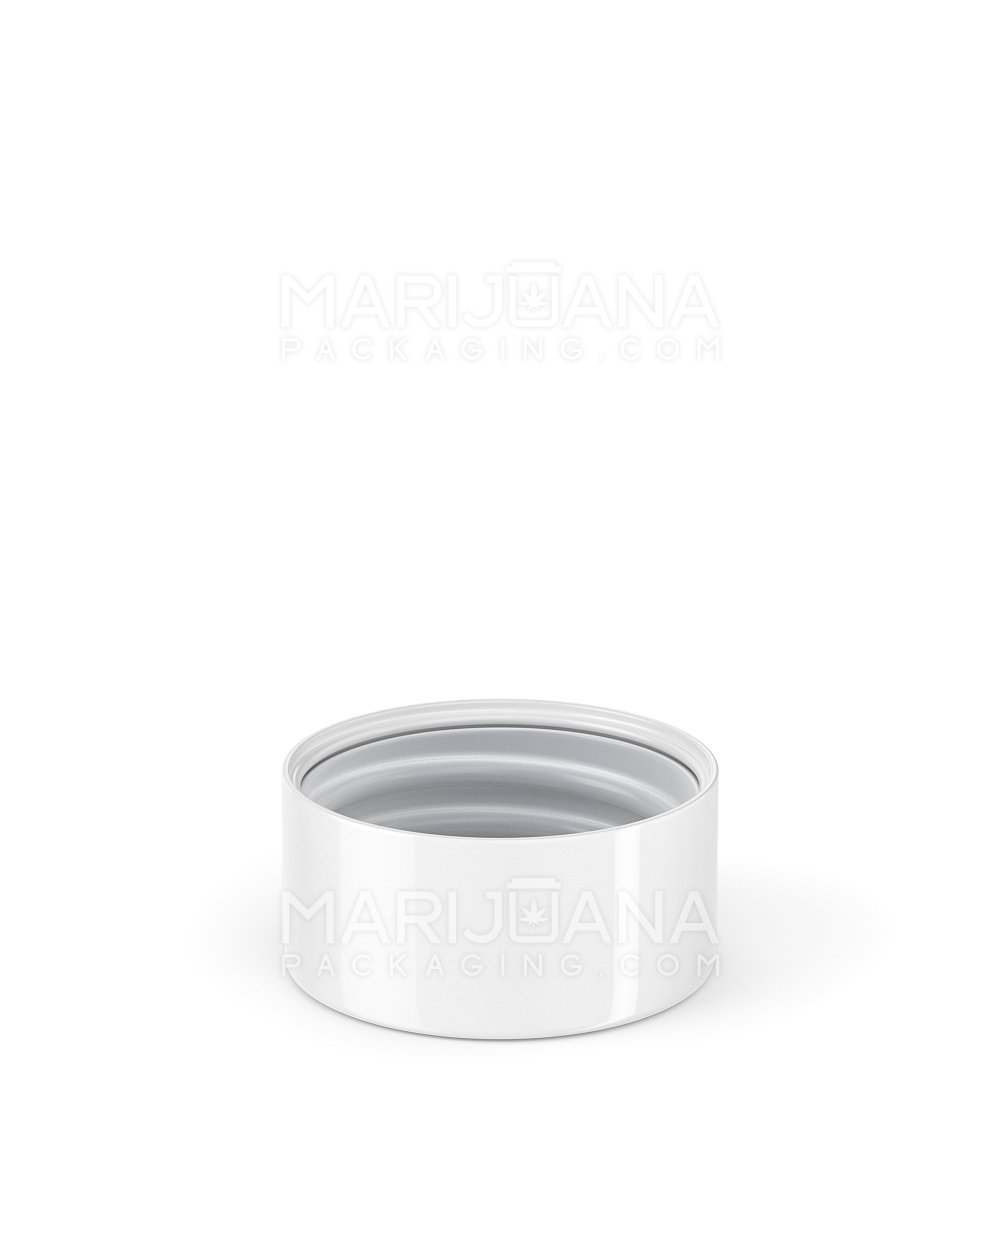 Child Resistant | Smooth Push Down & Turn Plastic Caps w/ Foil Liner | 28mm - Glossy White - 504 Count - 4